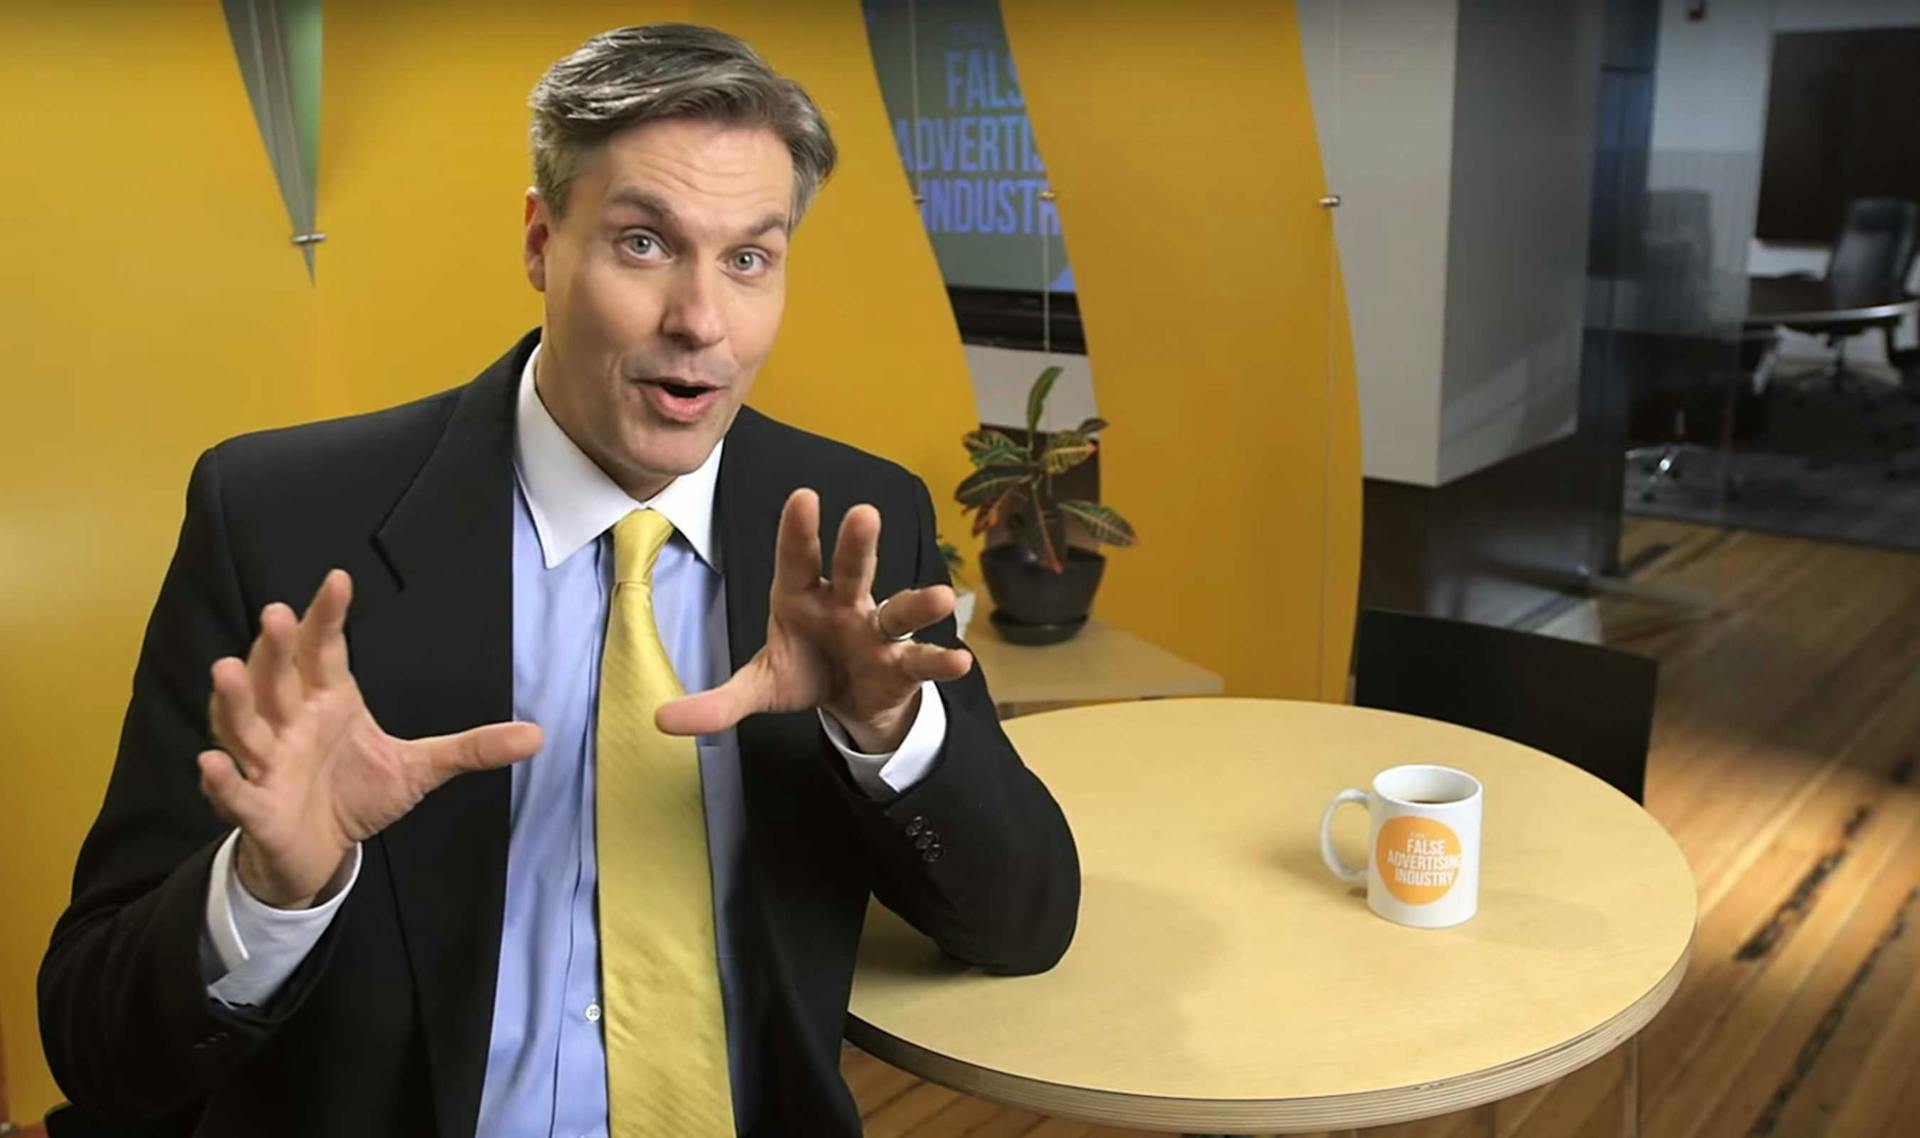 A man in a suit with his hands up with a mug on the table next to him reading "The False Advertising Industry."